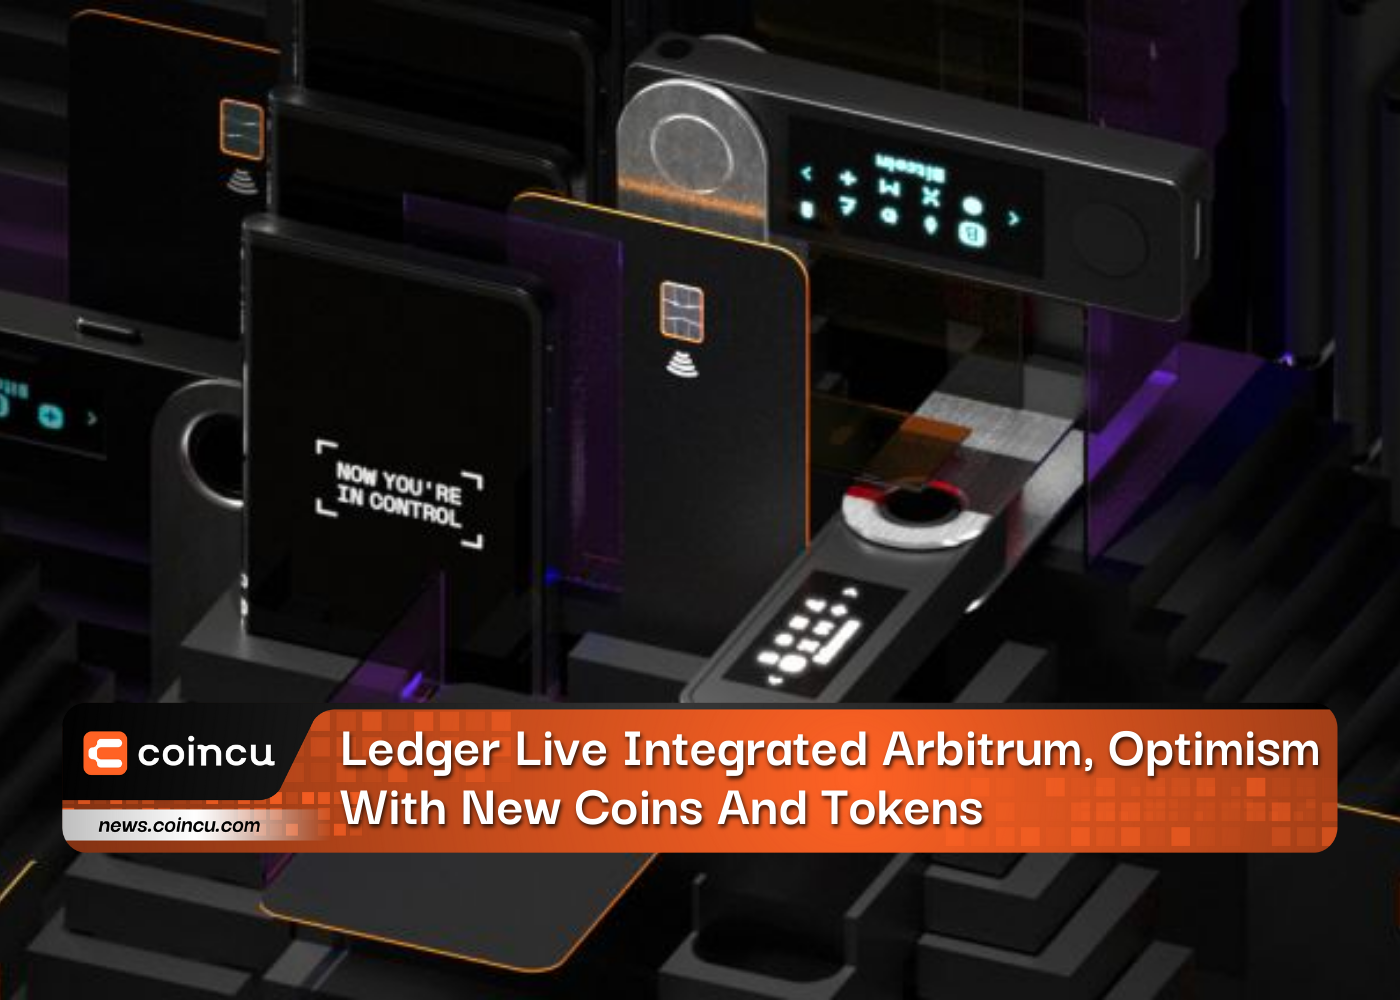 Ledger Live Integrated Arbitrum, Optimism With New Coins And Tokens